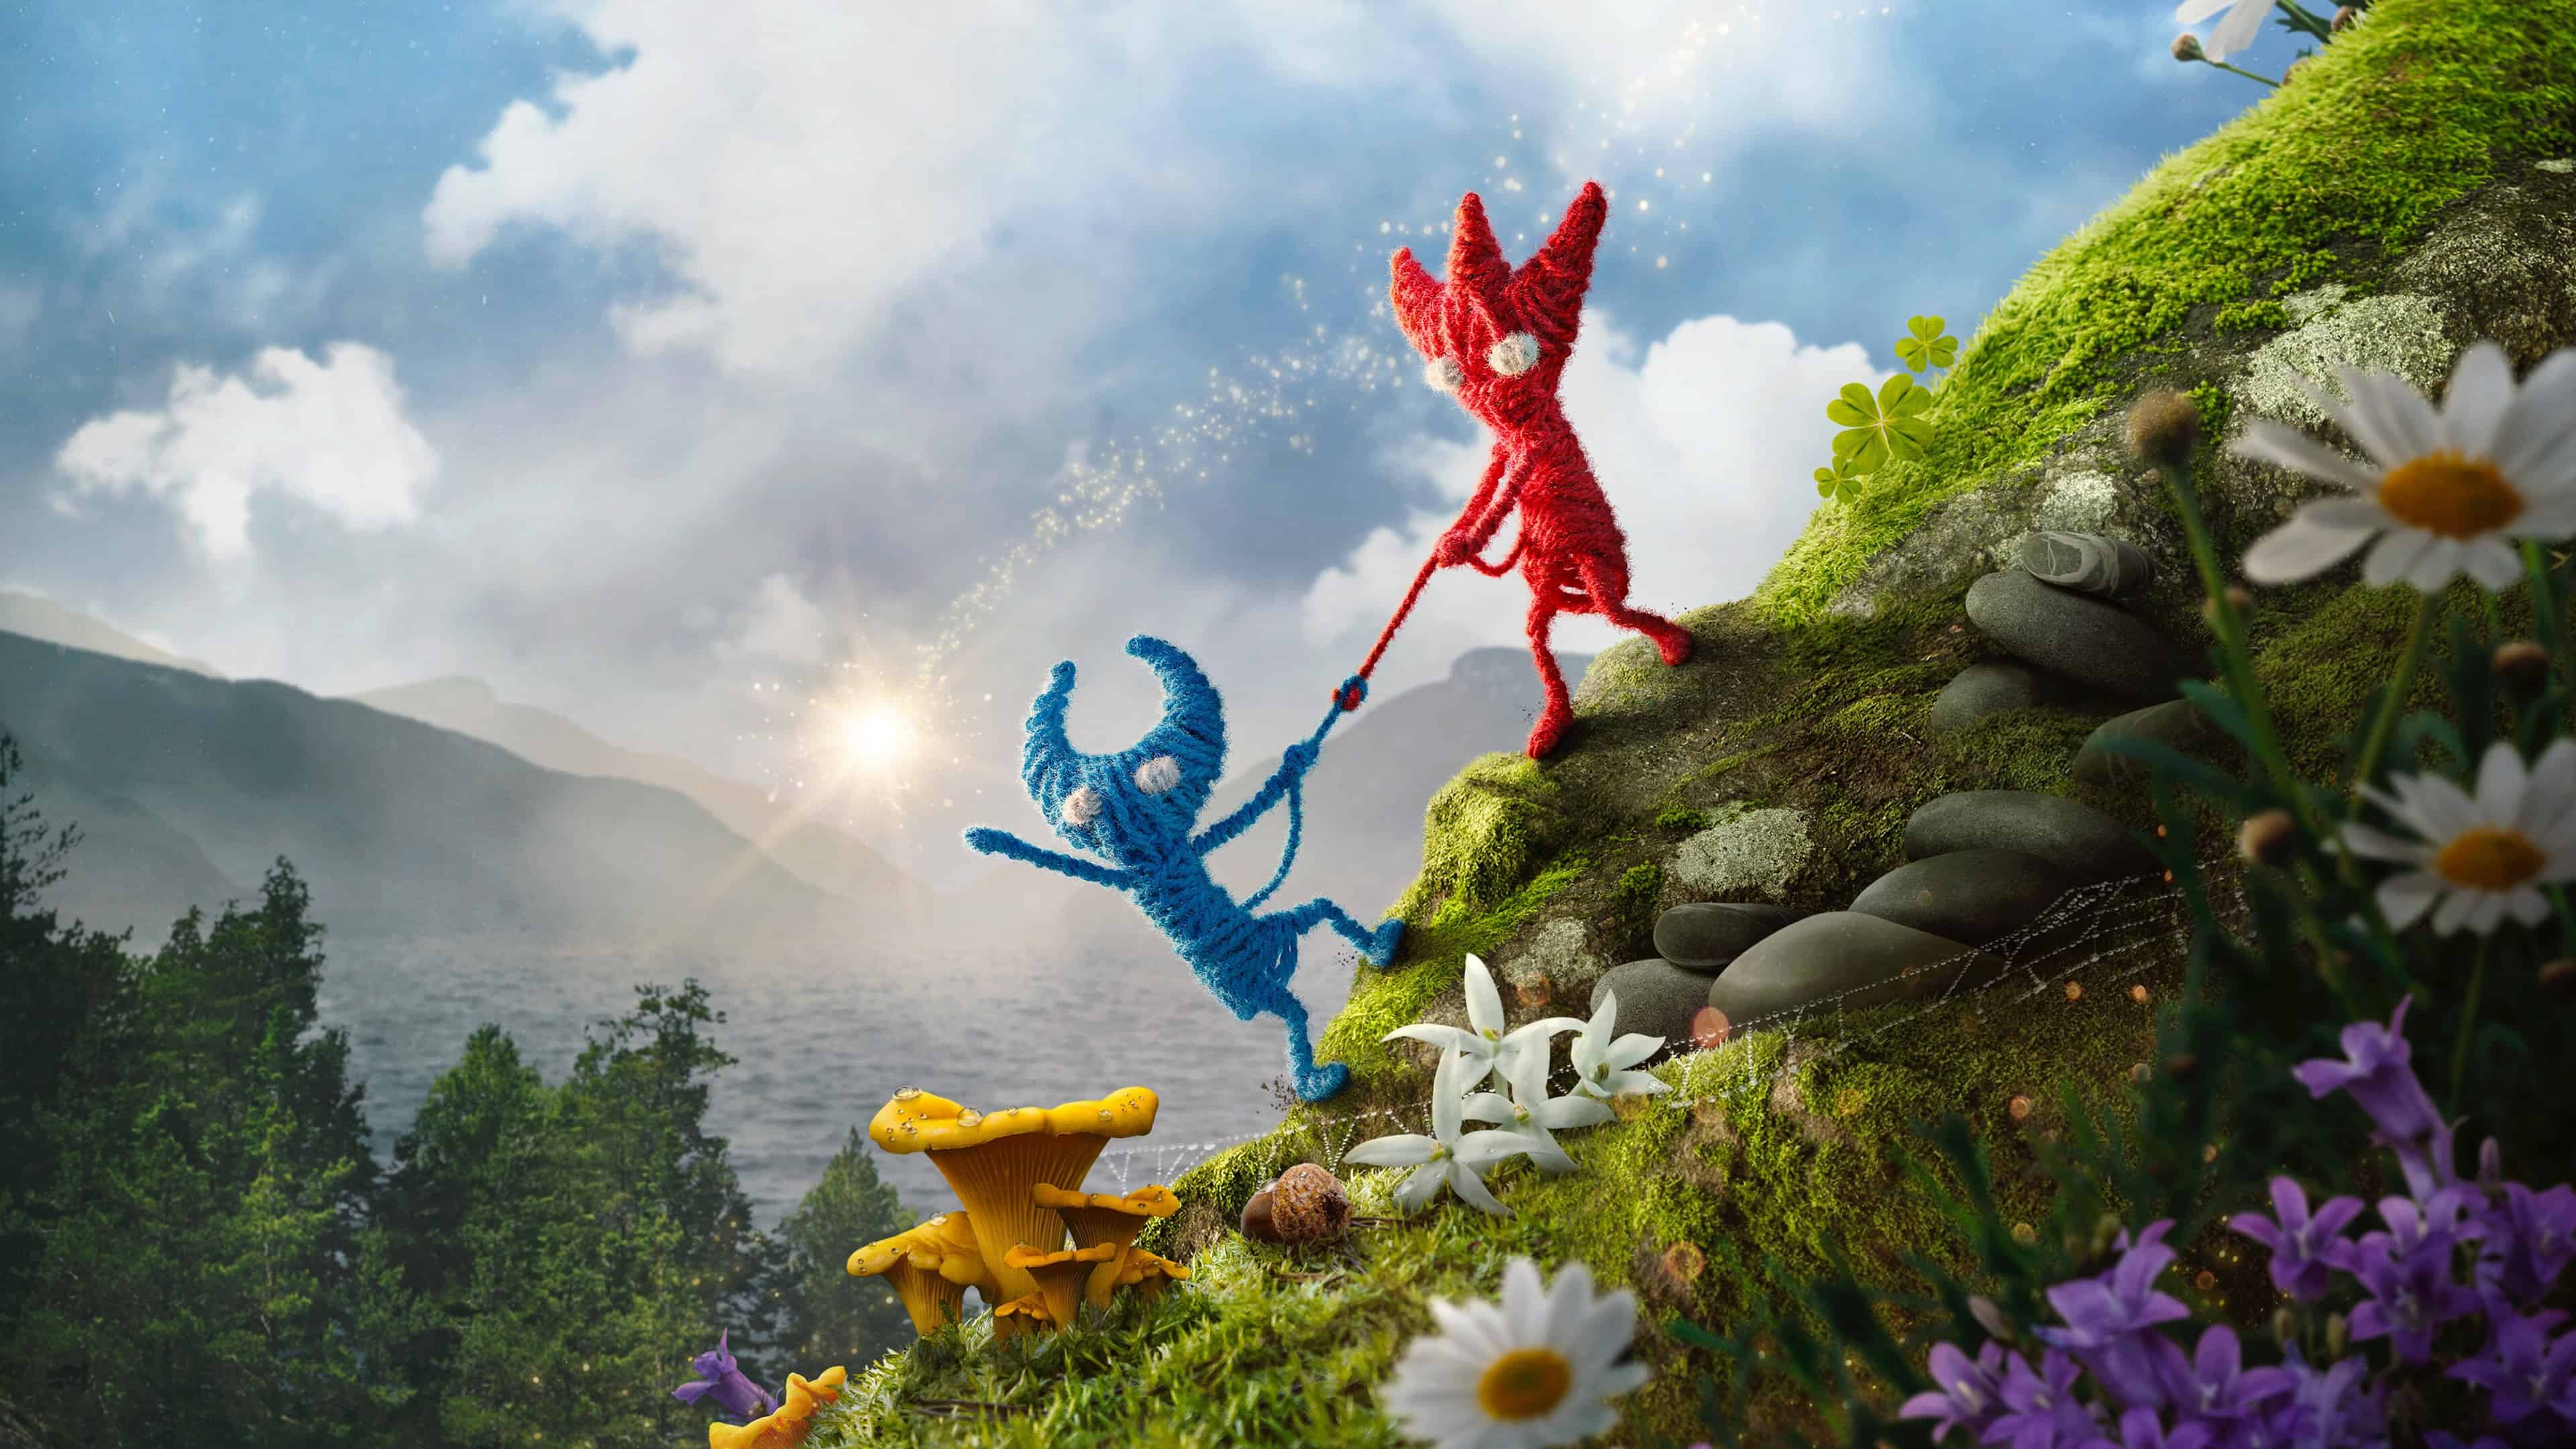 Unravel Two Wallpapers